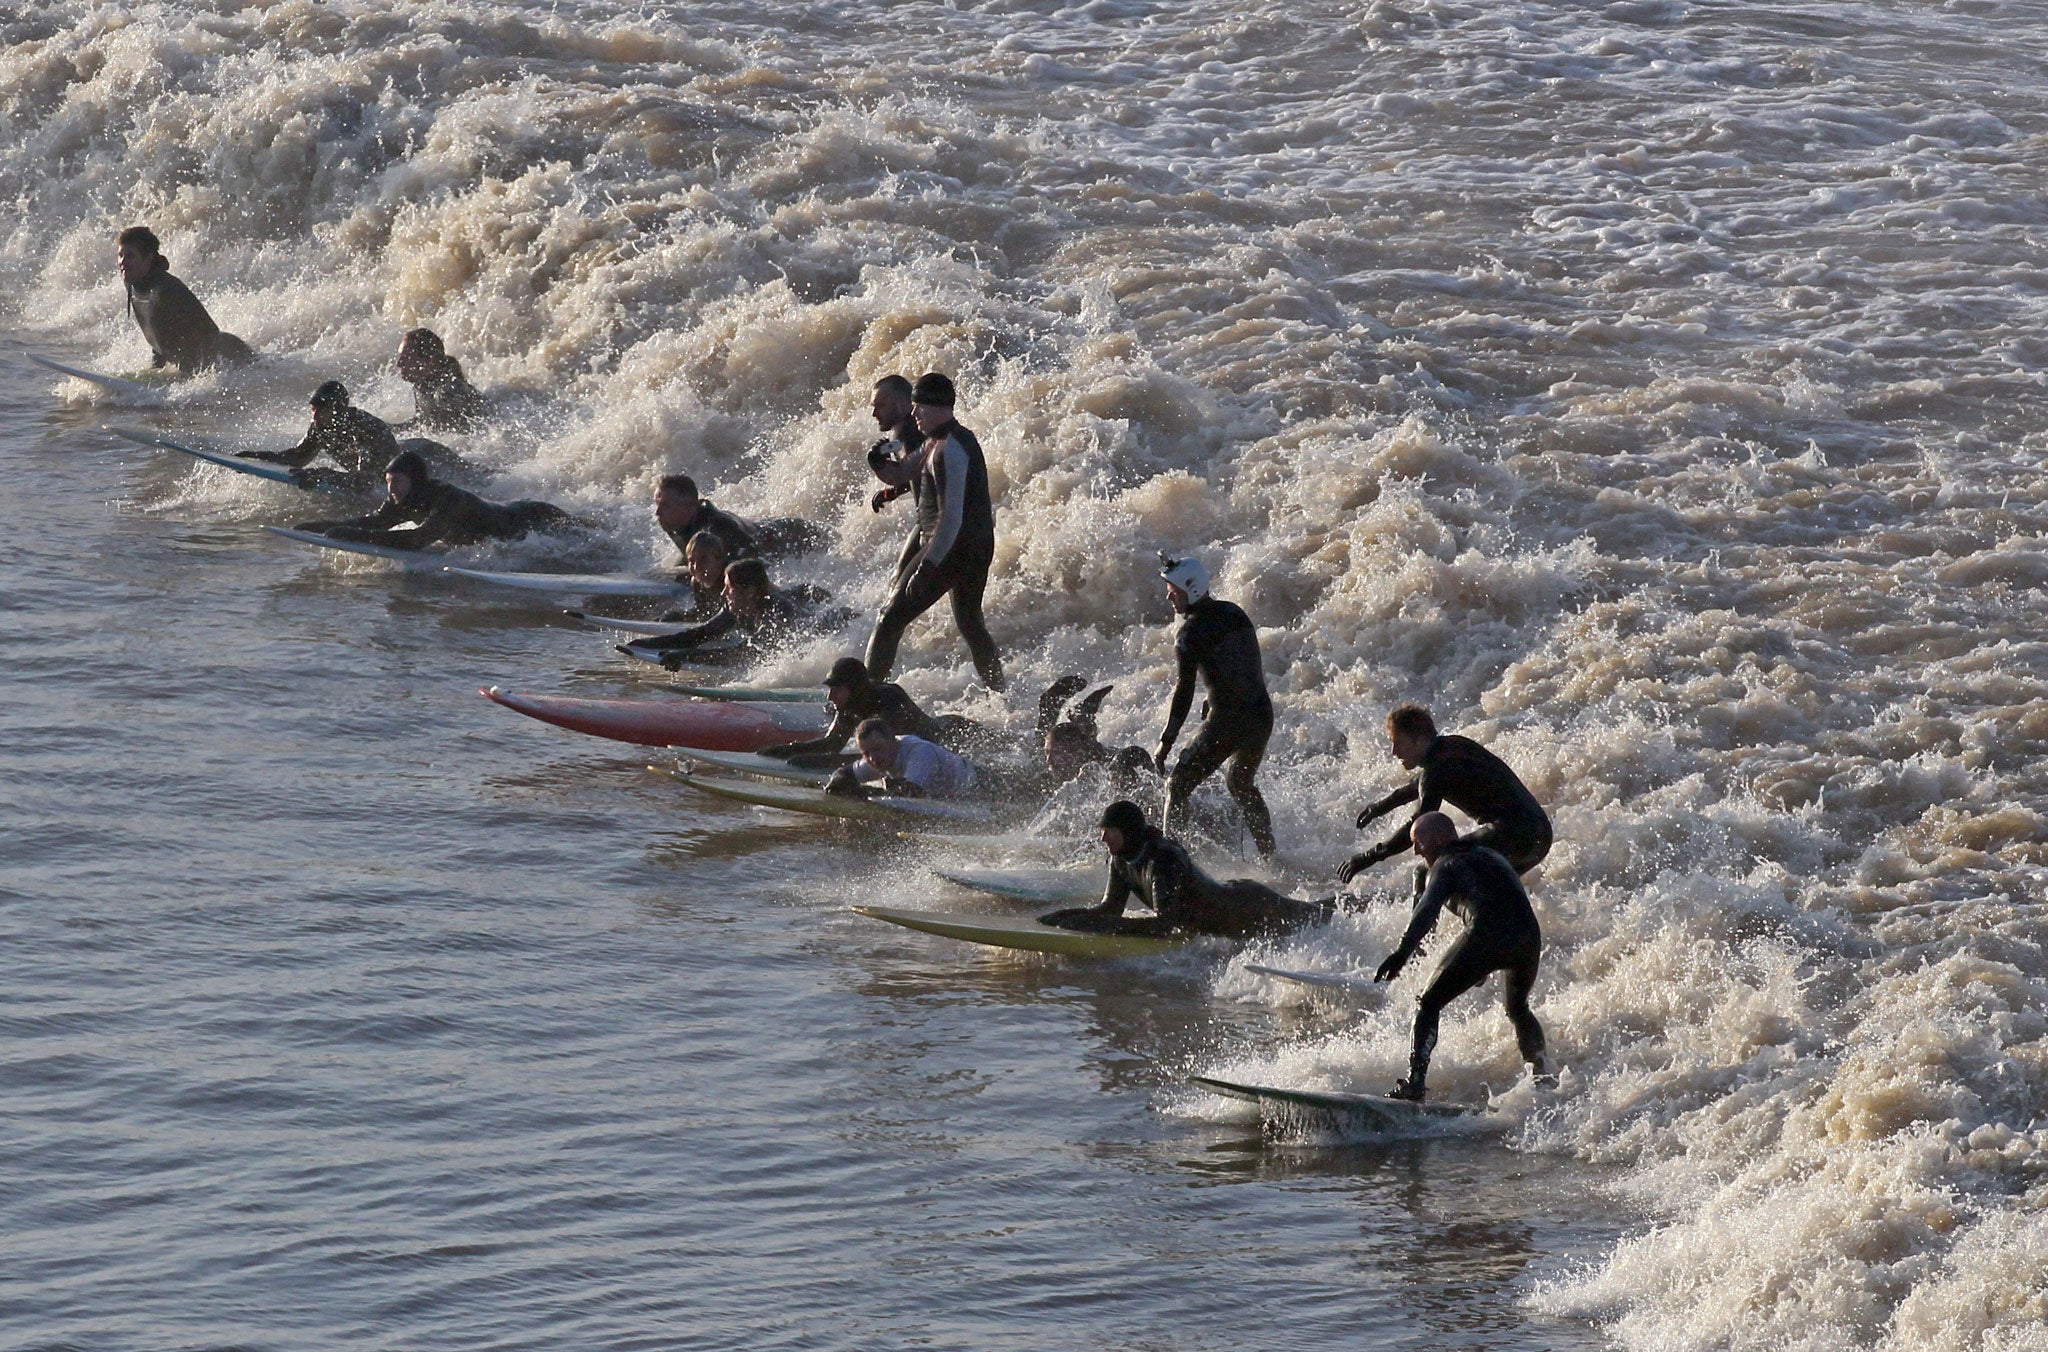 On the crest: Surfers take on the Severn Bore - which can reach speeds of up to 10mph and creates waves of up to 2m